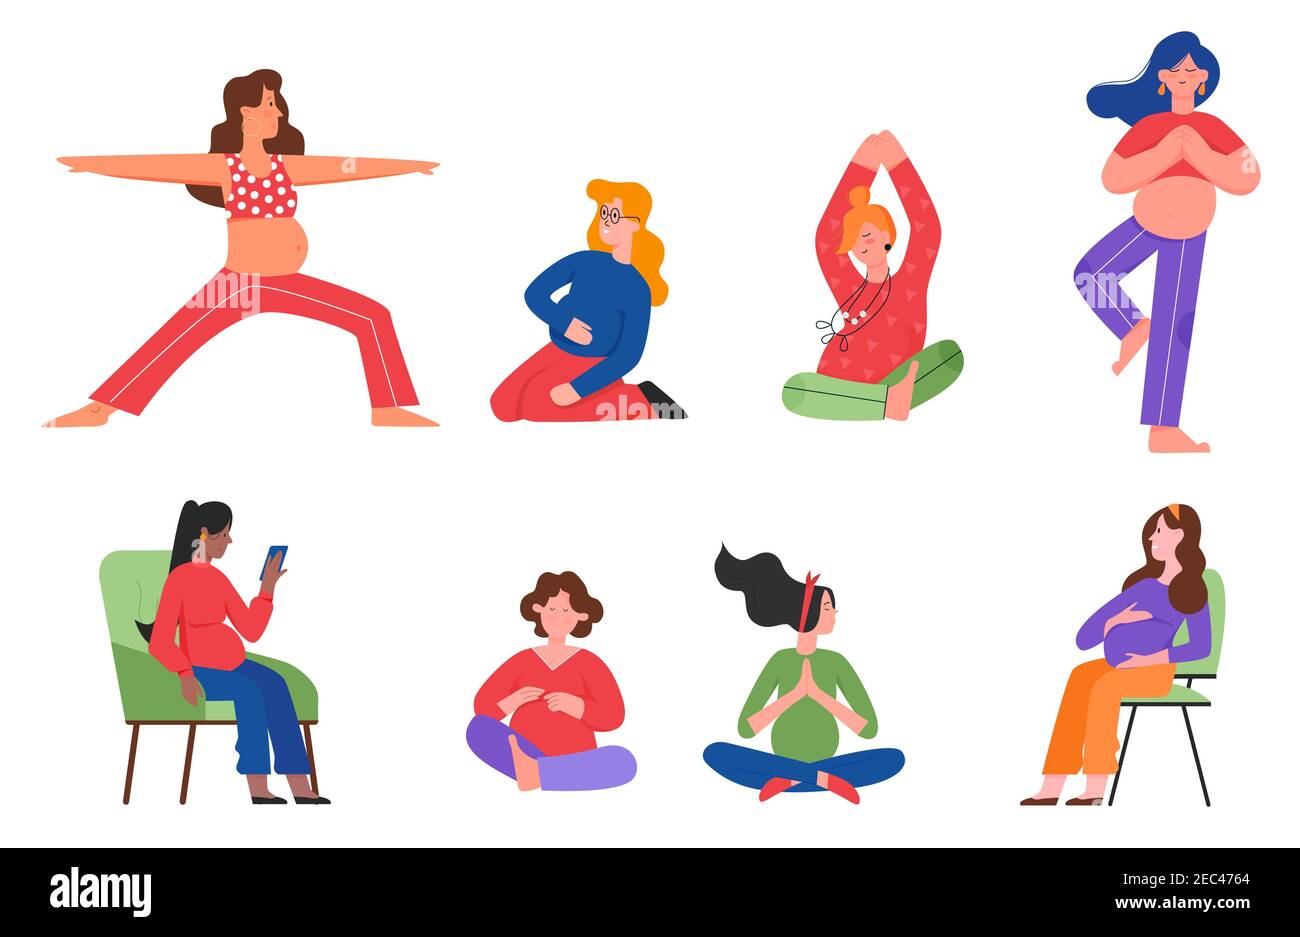 Pregnant woman poses vector illustration set. Cartoon daily home activities, young happy female character practicing yoga, using phone to communicate in different pregnancy postures isolated on white Stock Vector